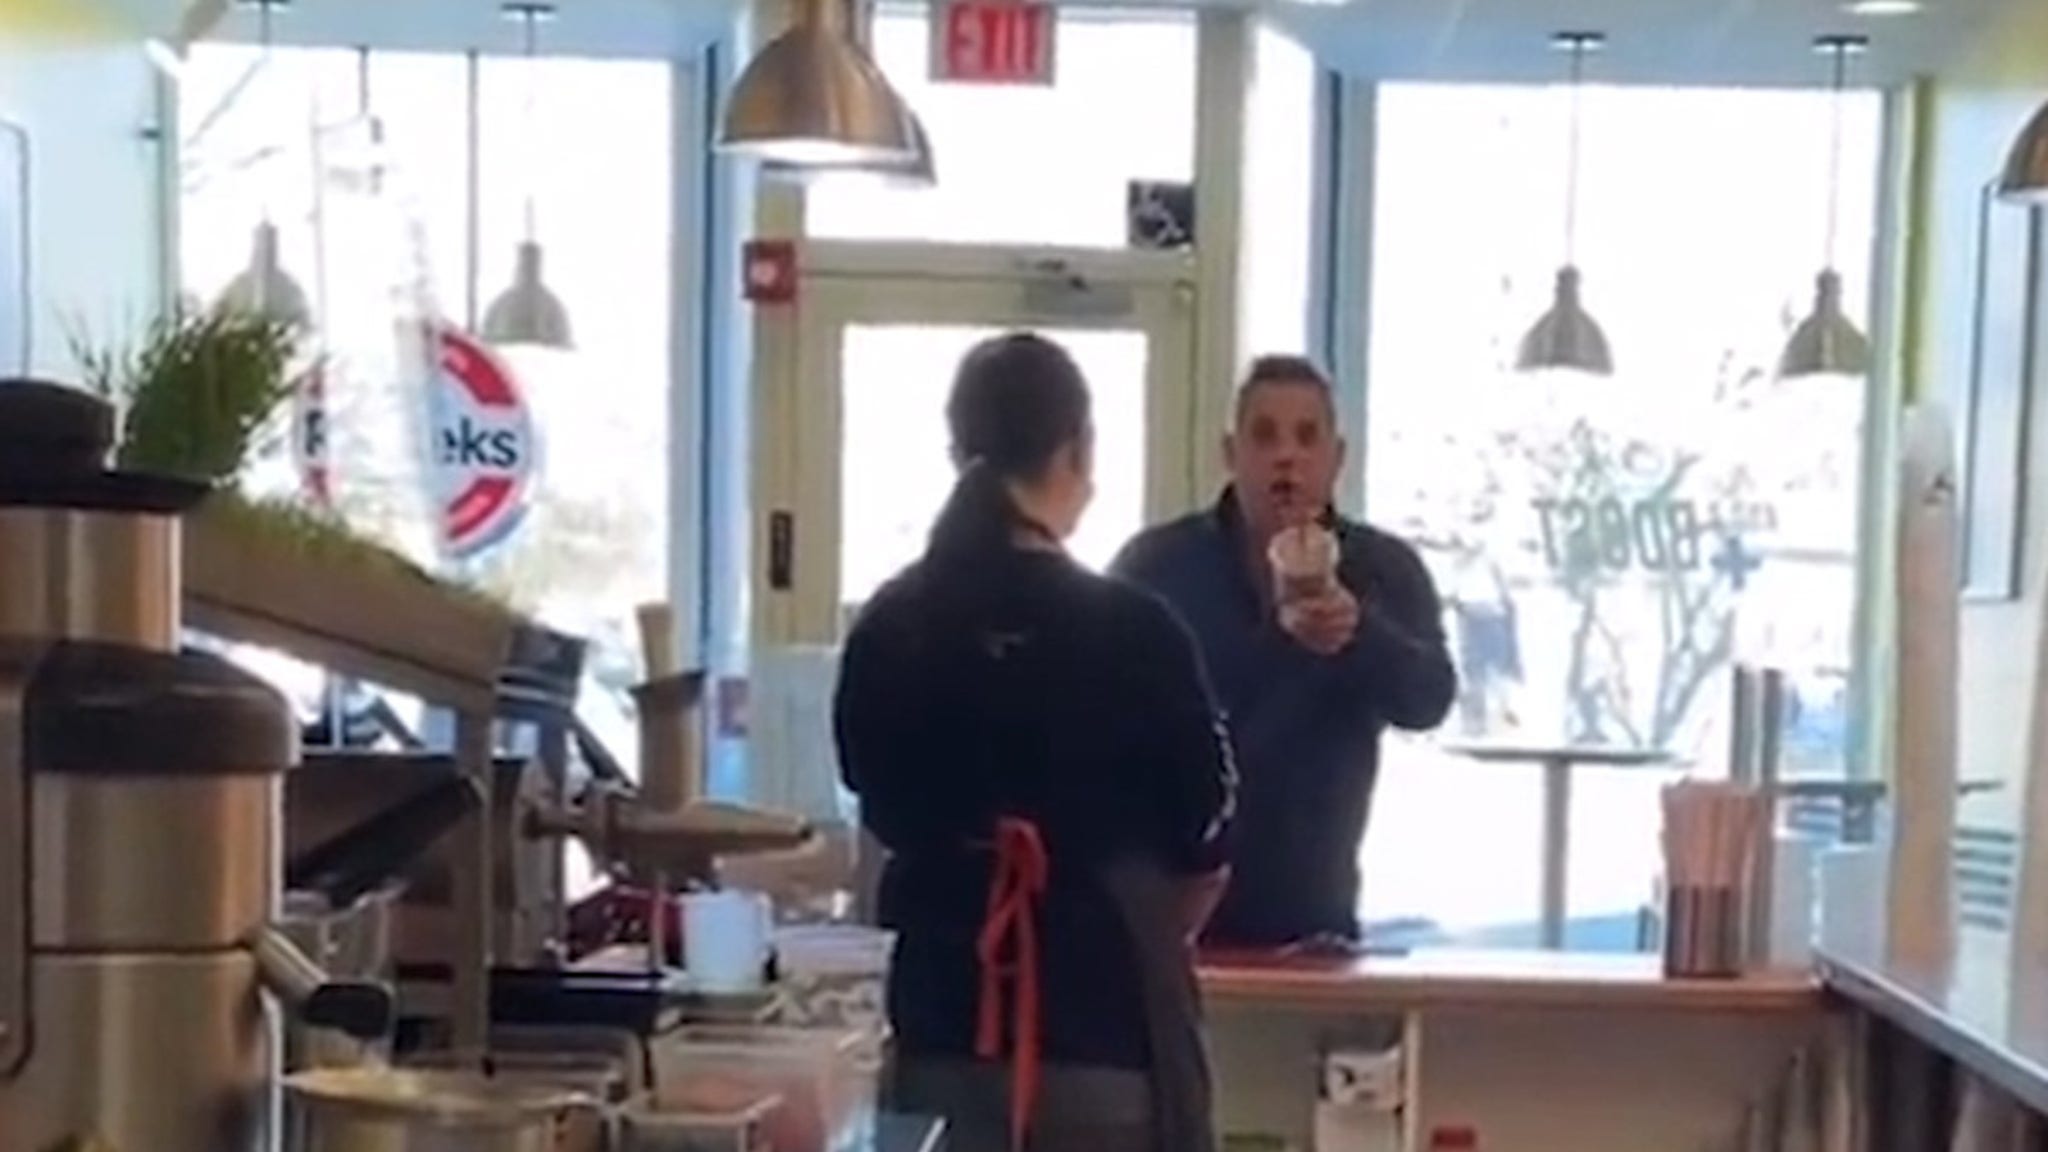 Man Arrested after Racist Tirade, Attack on Connecticut Smoothie Shop thumbnail